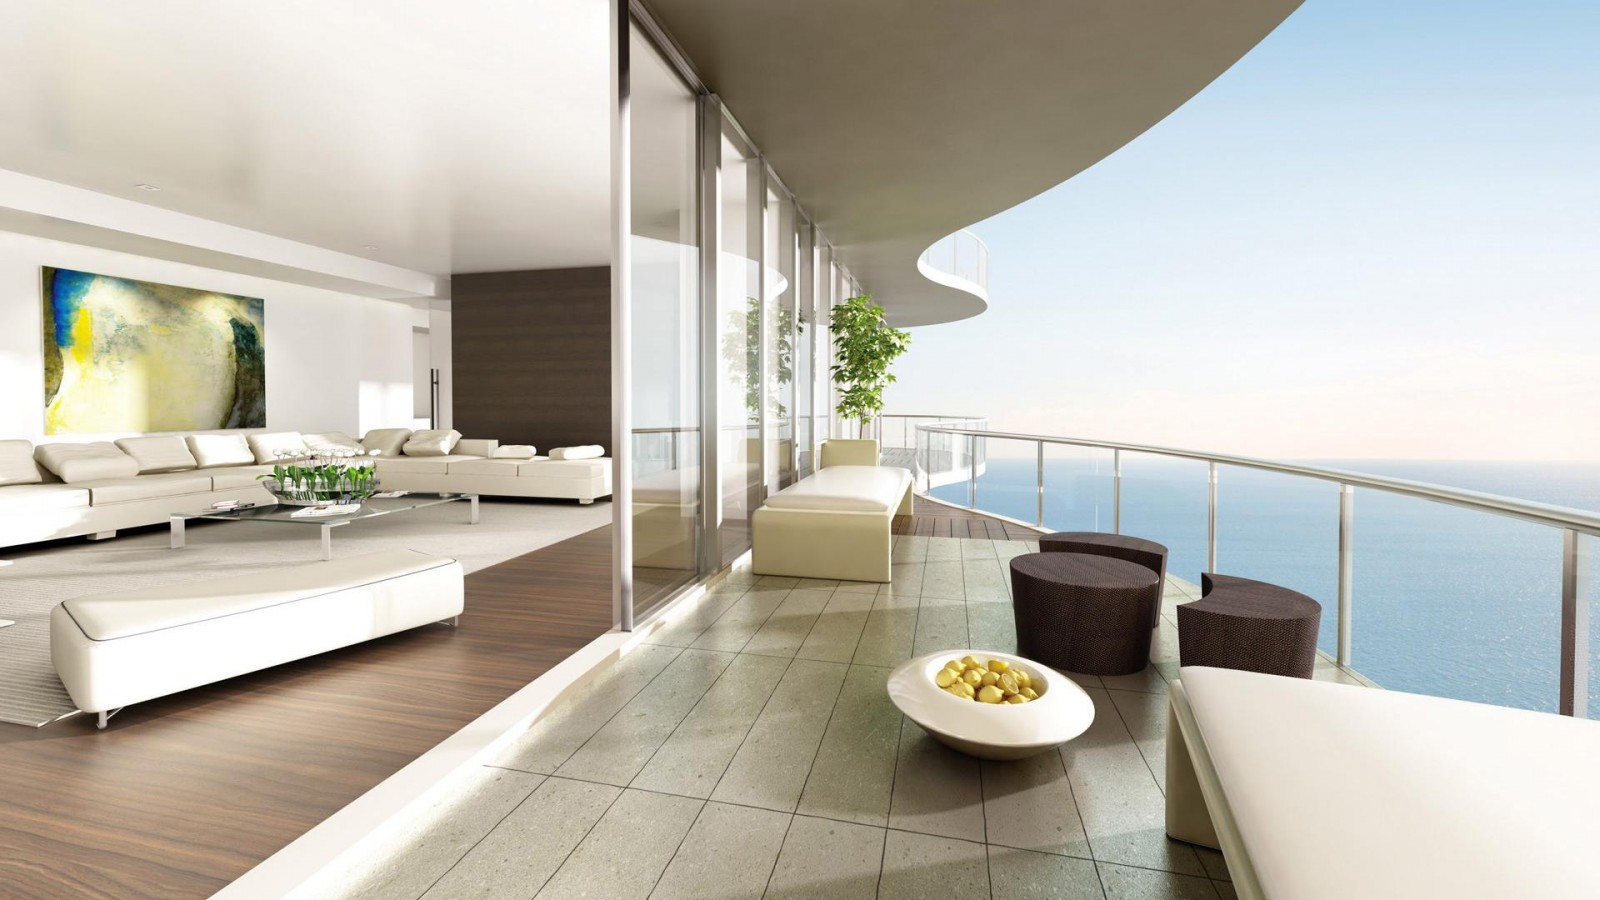 Seaview-architecture_www.LuxuryWallpapers.net_-e1397480670765